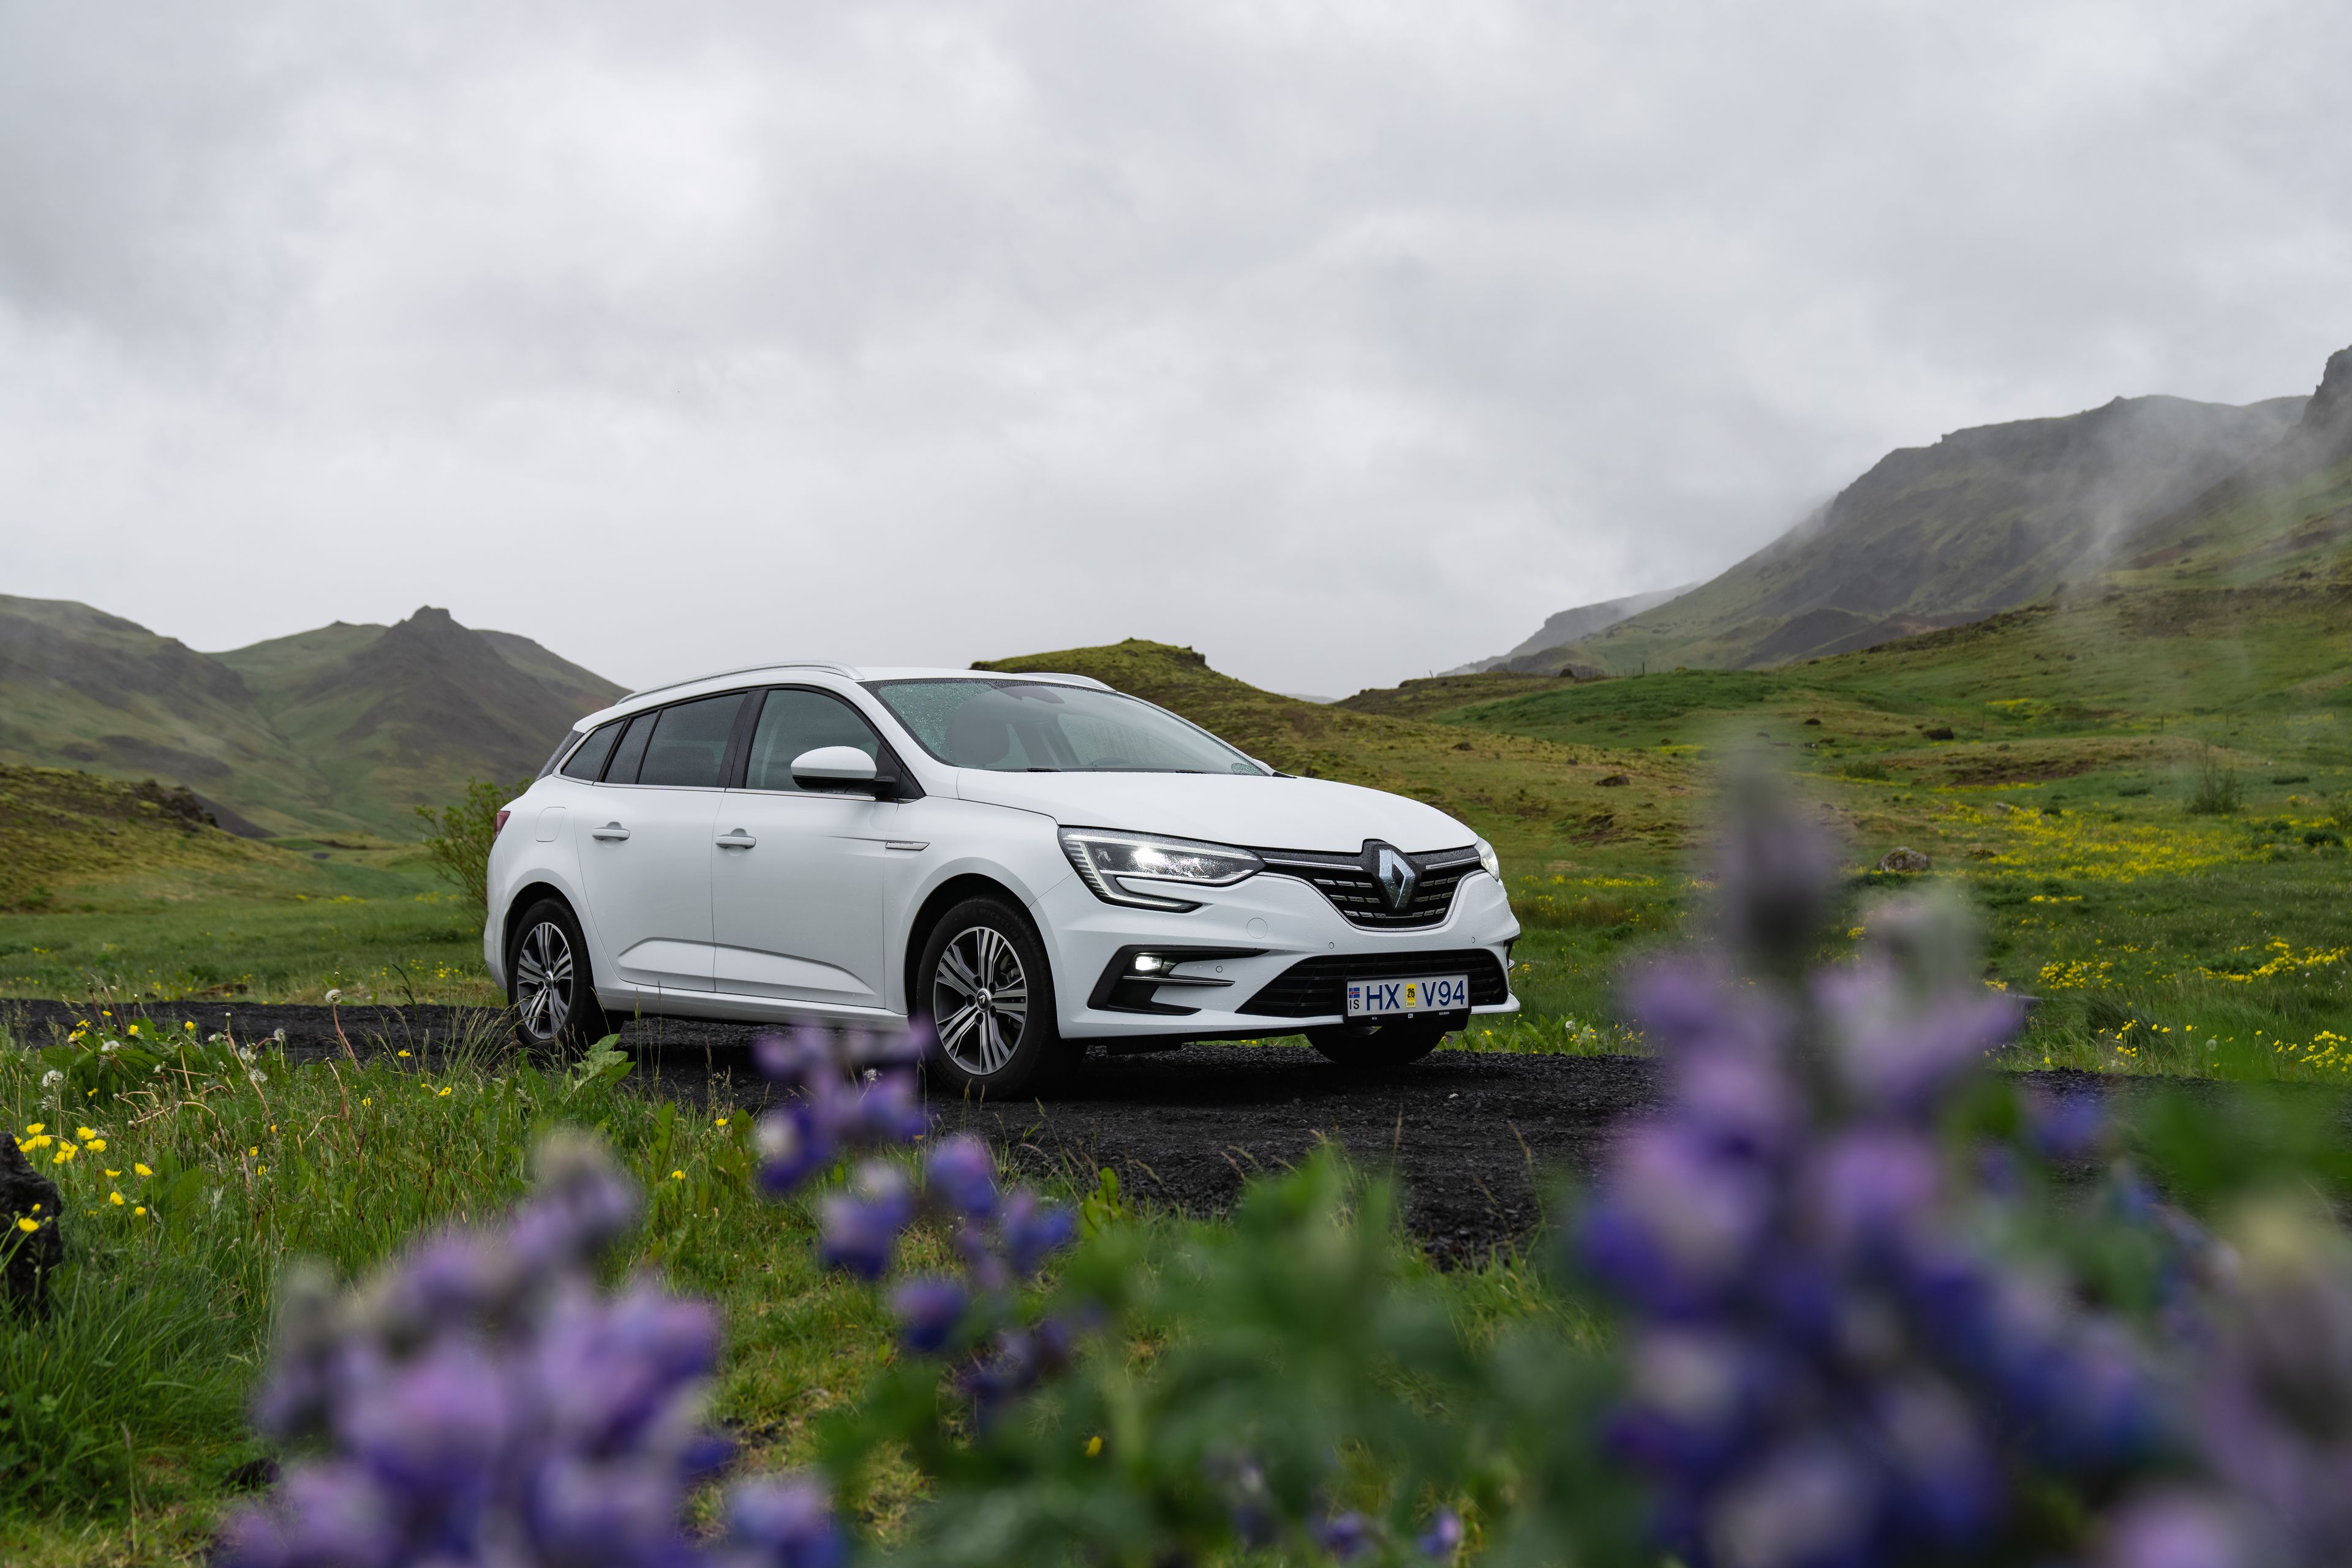 A white Renault Megane wagon rental car parked amidst the stunning landscapes of Iceland.